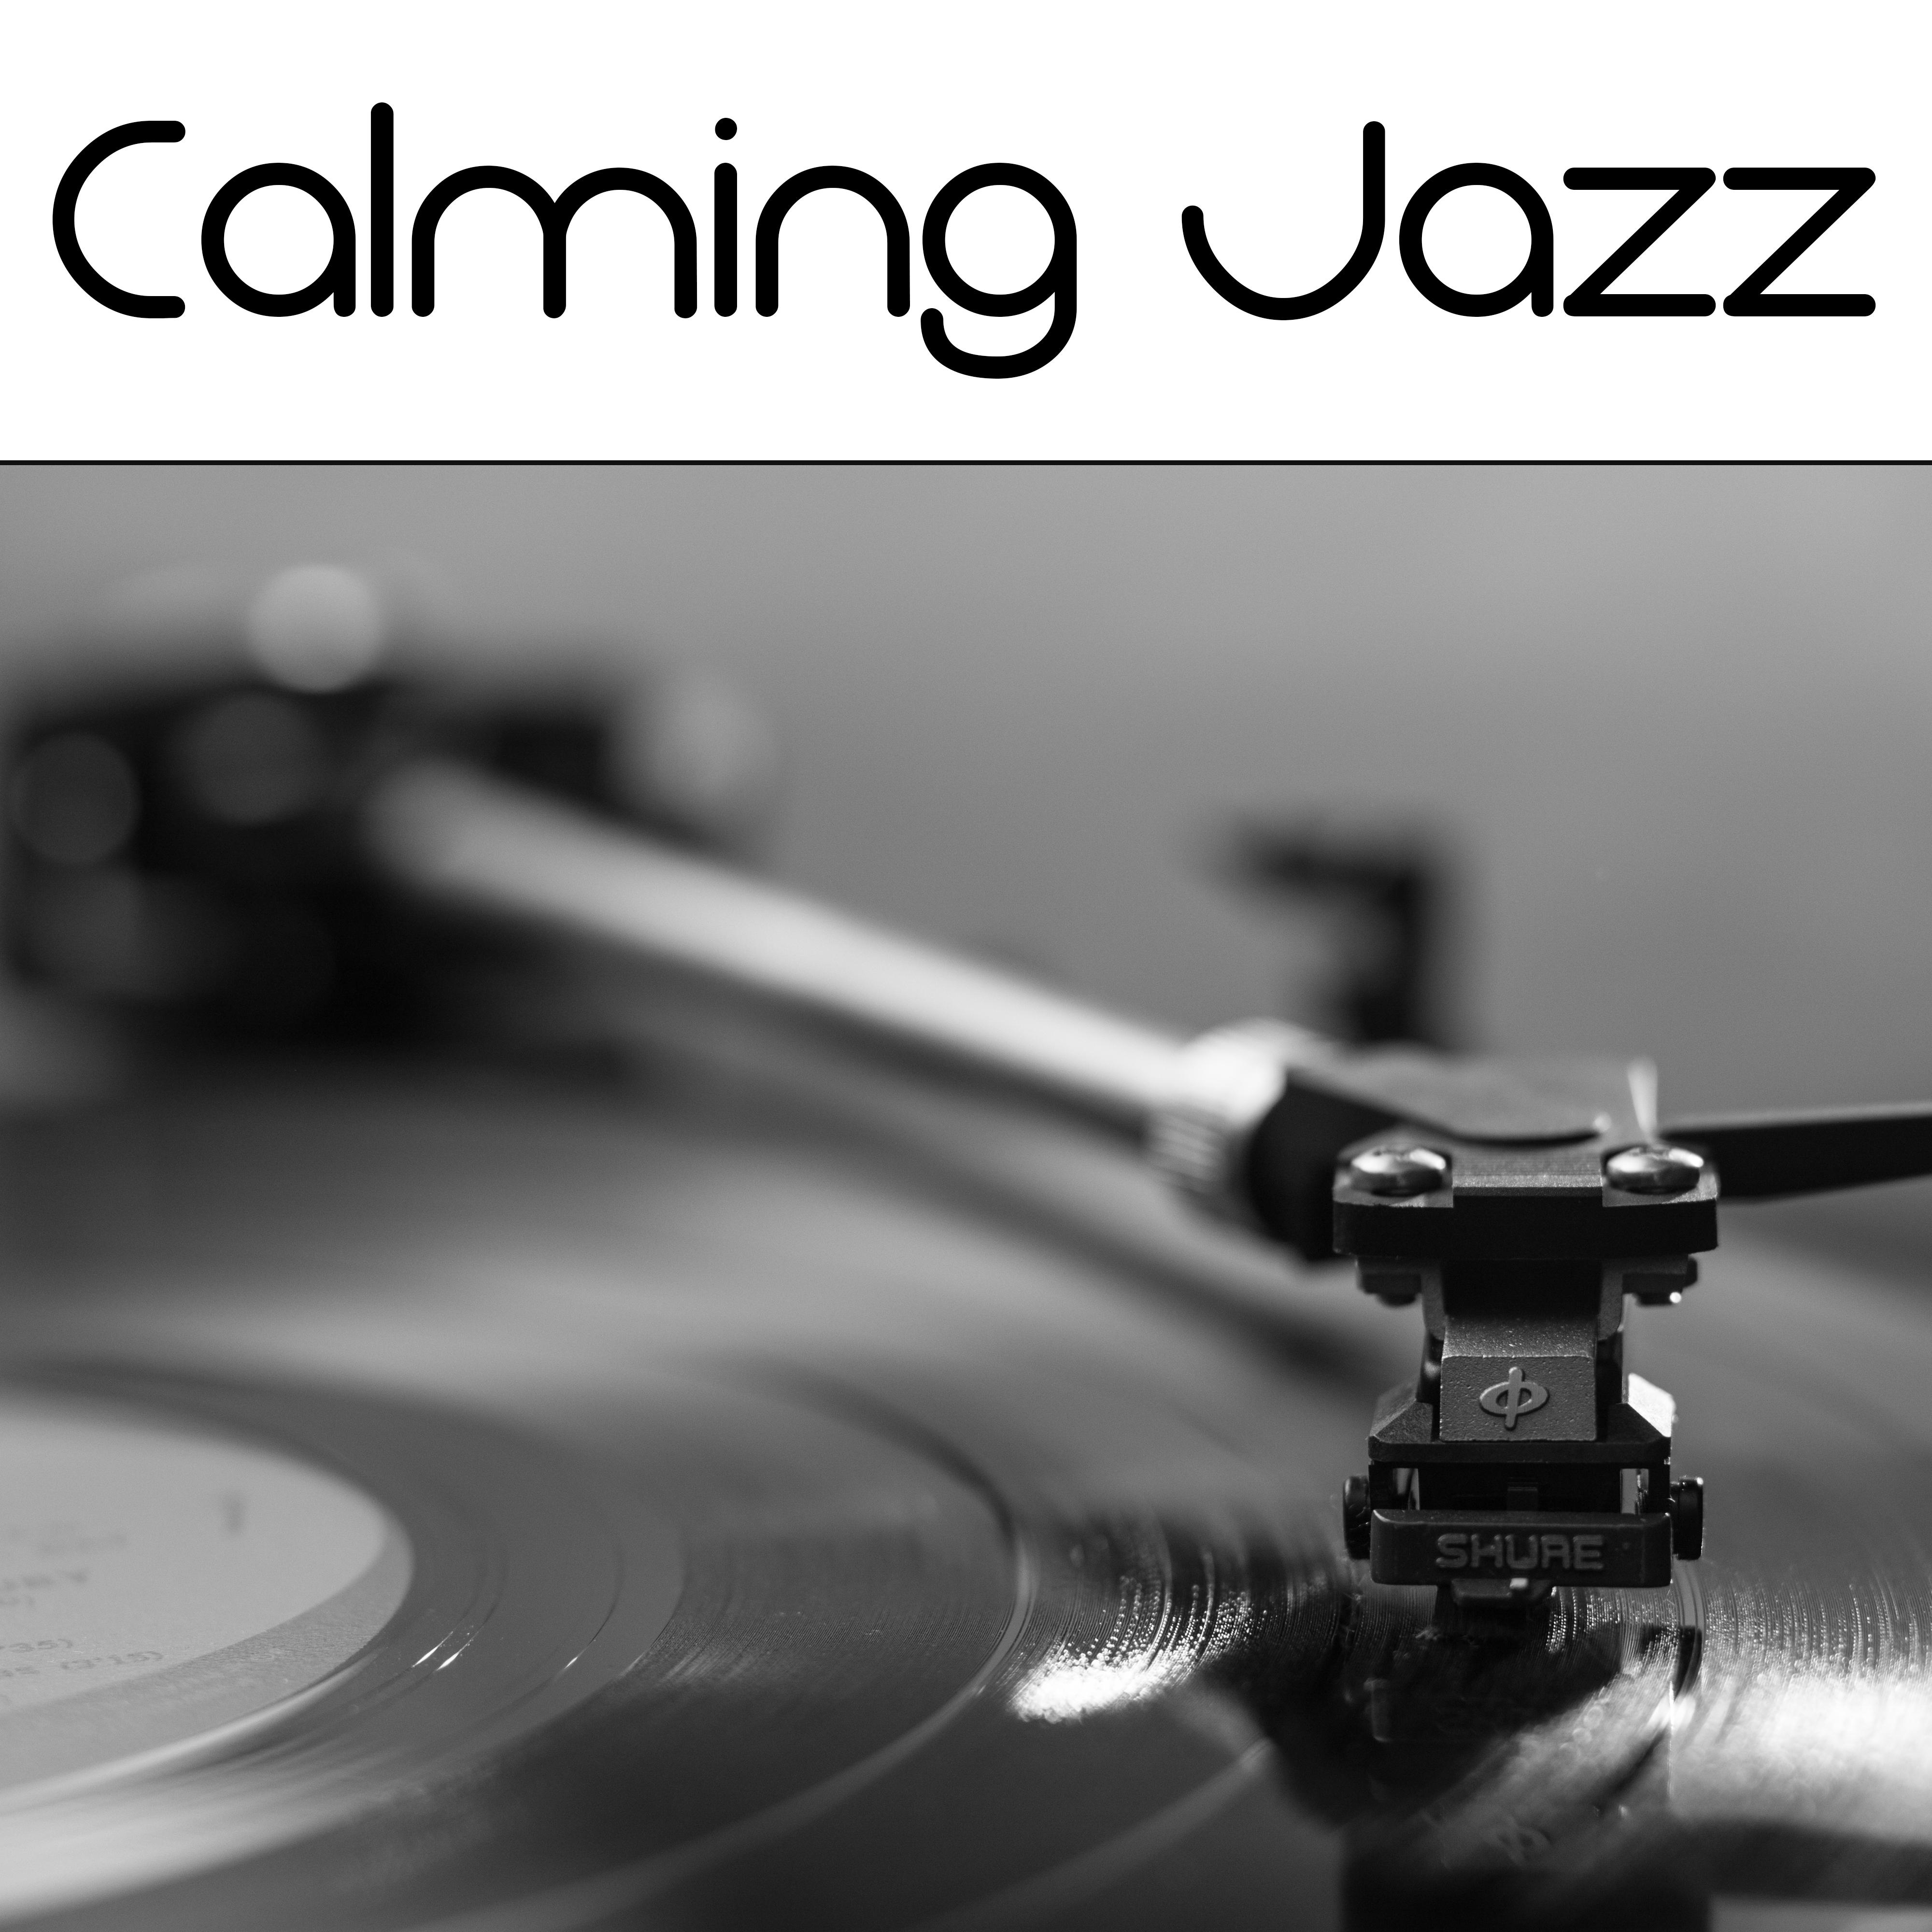 Calming Jazz  Easy Listening Instrumental Jazz, Soft Sounds, Soothing Piano, Smooth Jazz, Solo Piano